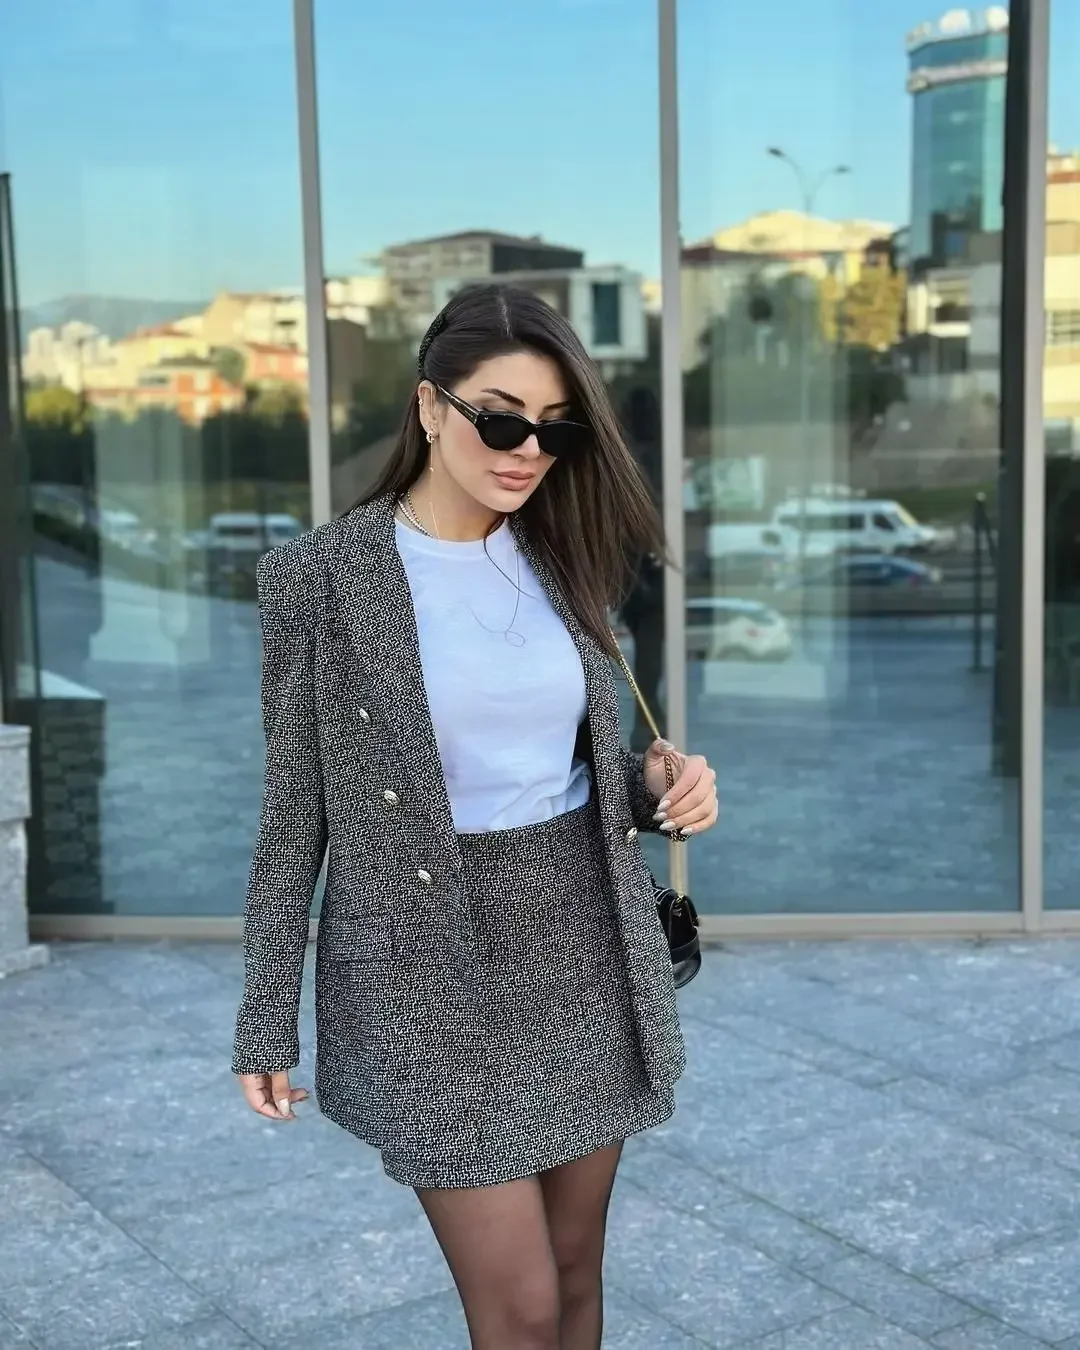 

Women 2023 New Fashion Textured Double Breasted Tweed Check Slim Blazer Coat Vintage Long Sleeve Pockets Female Outerwear Chic